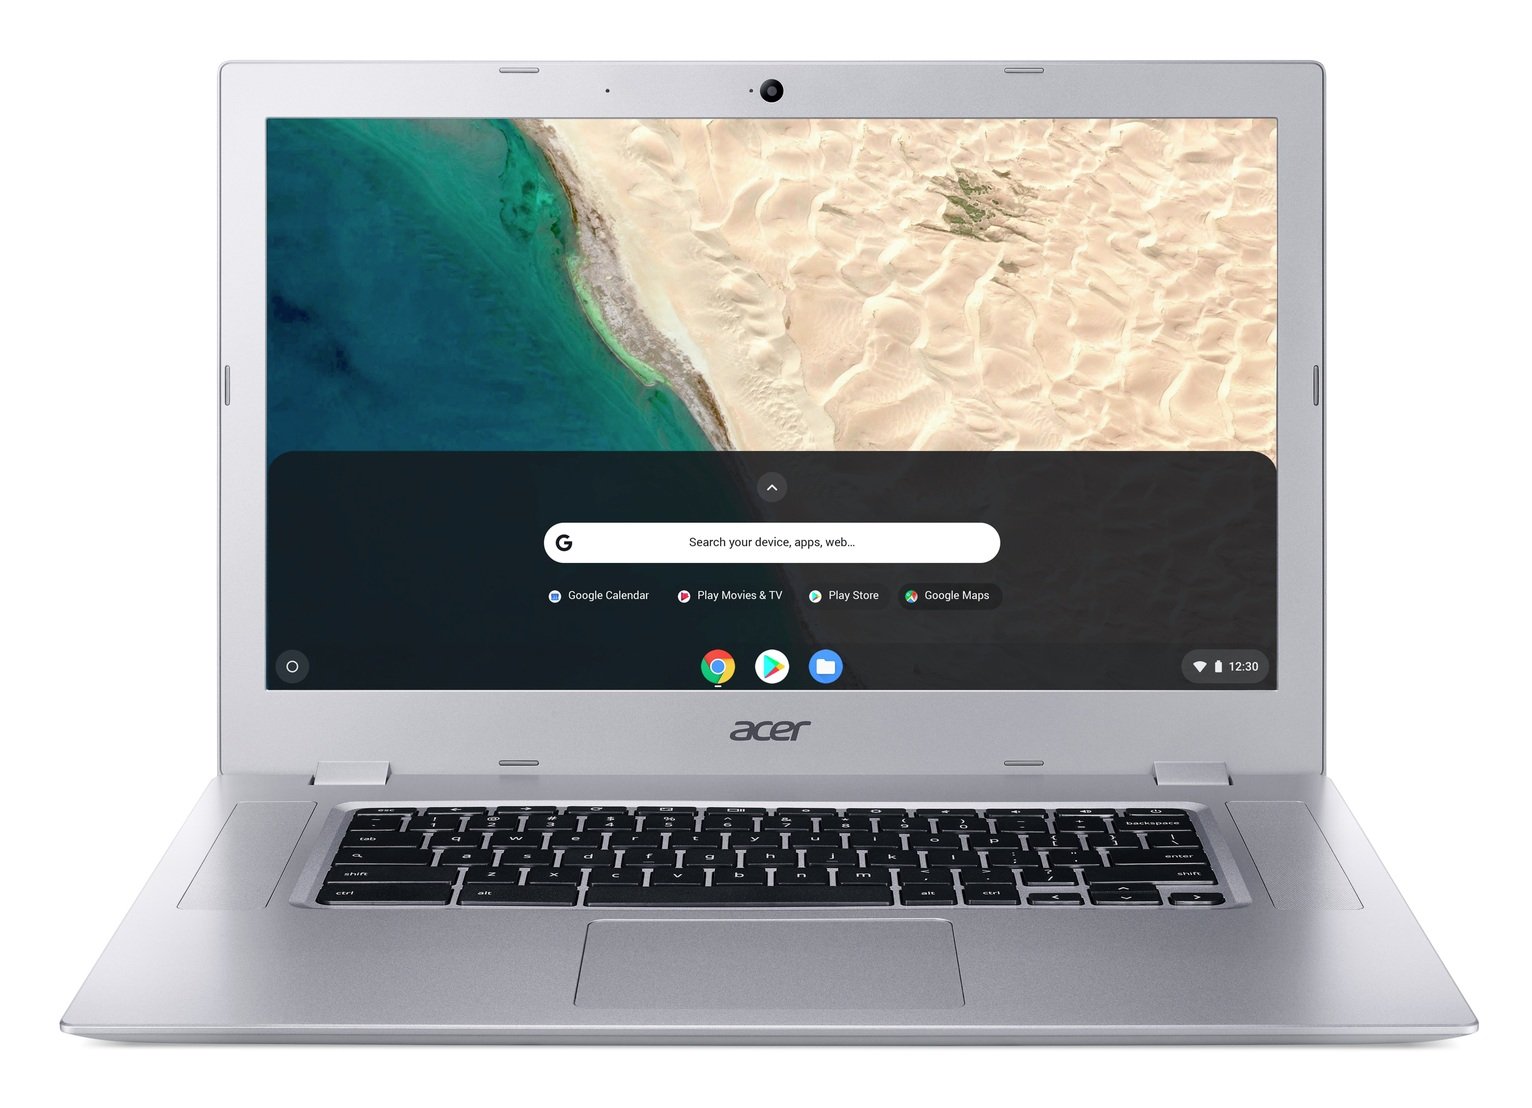 Acer 315 15in AMD A4 4GB 64GB FHD Chromebook Review